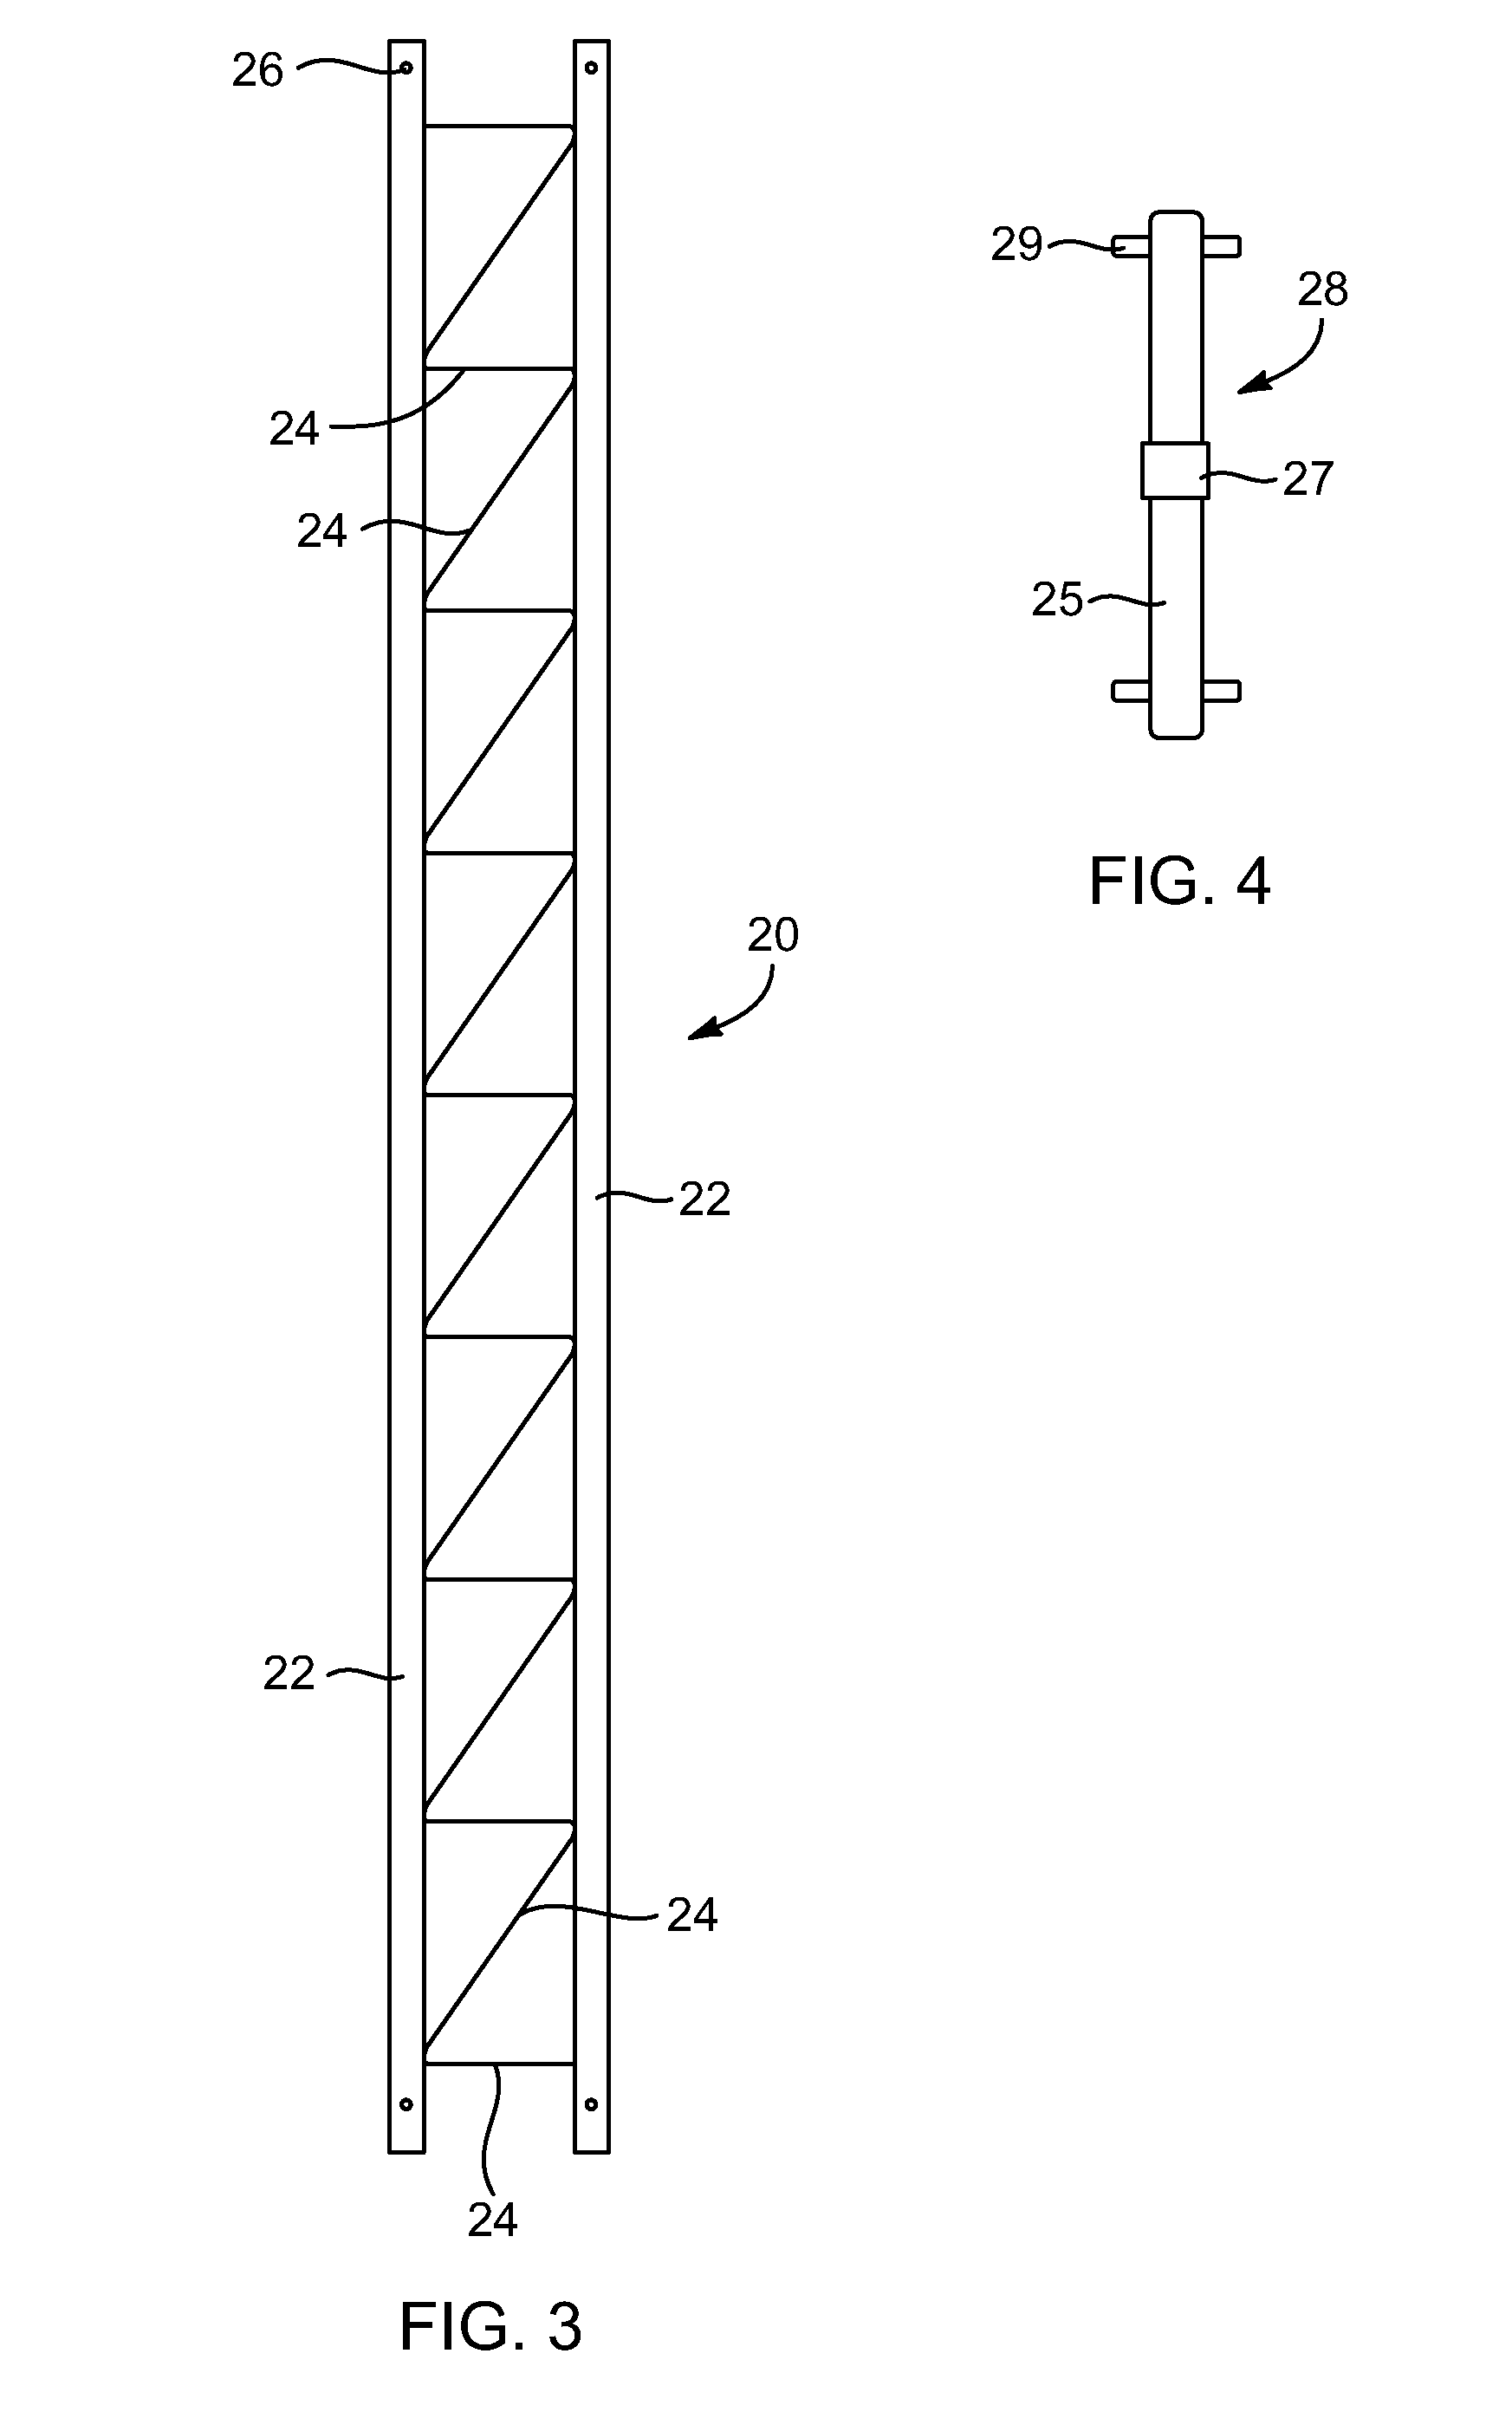 Ultra-light, re-usable, extended-height meteorological tower apparatus and method